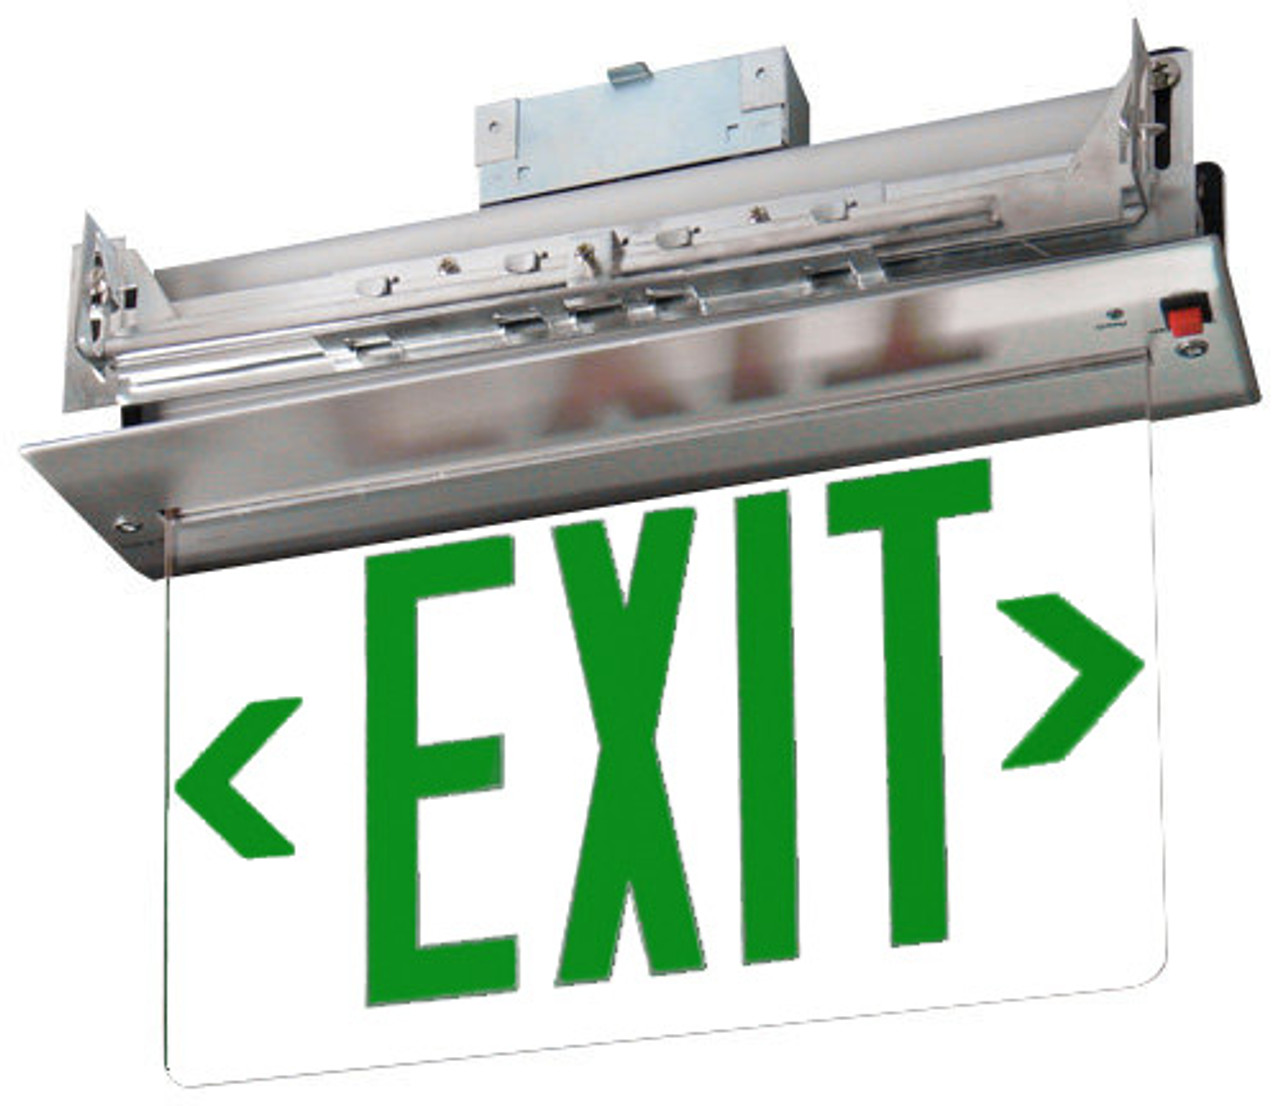 https://cdn11.bigcommerce.com/s-2kbpw1b/images/stencil/1280x1280/products/210/640/green-recessed-edge-lit-exit-sign__24703.1520294750.jpg?c=2